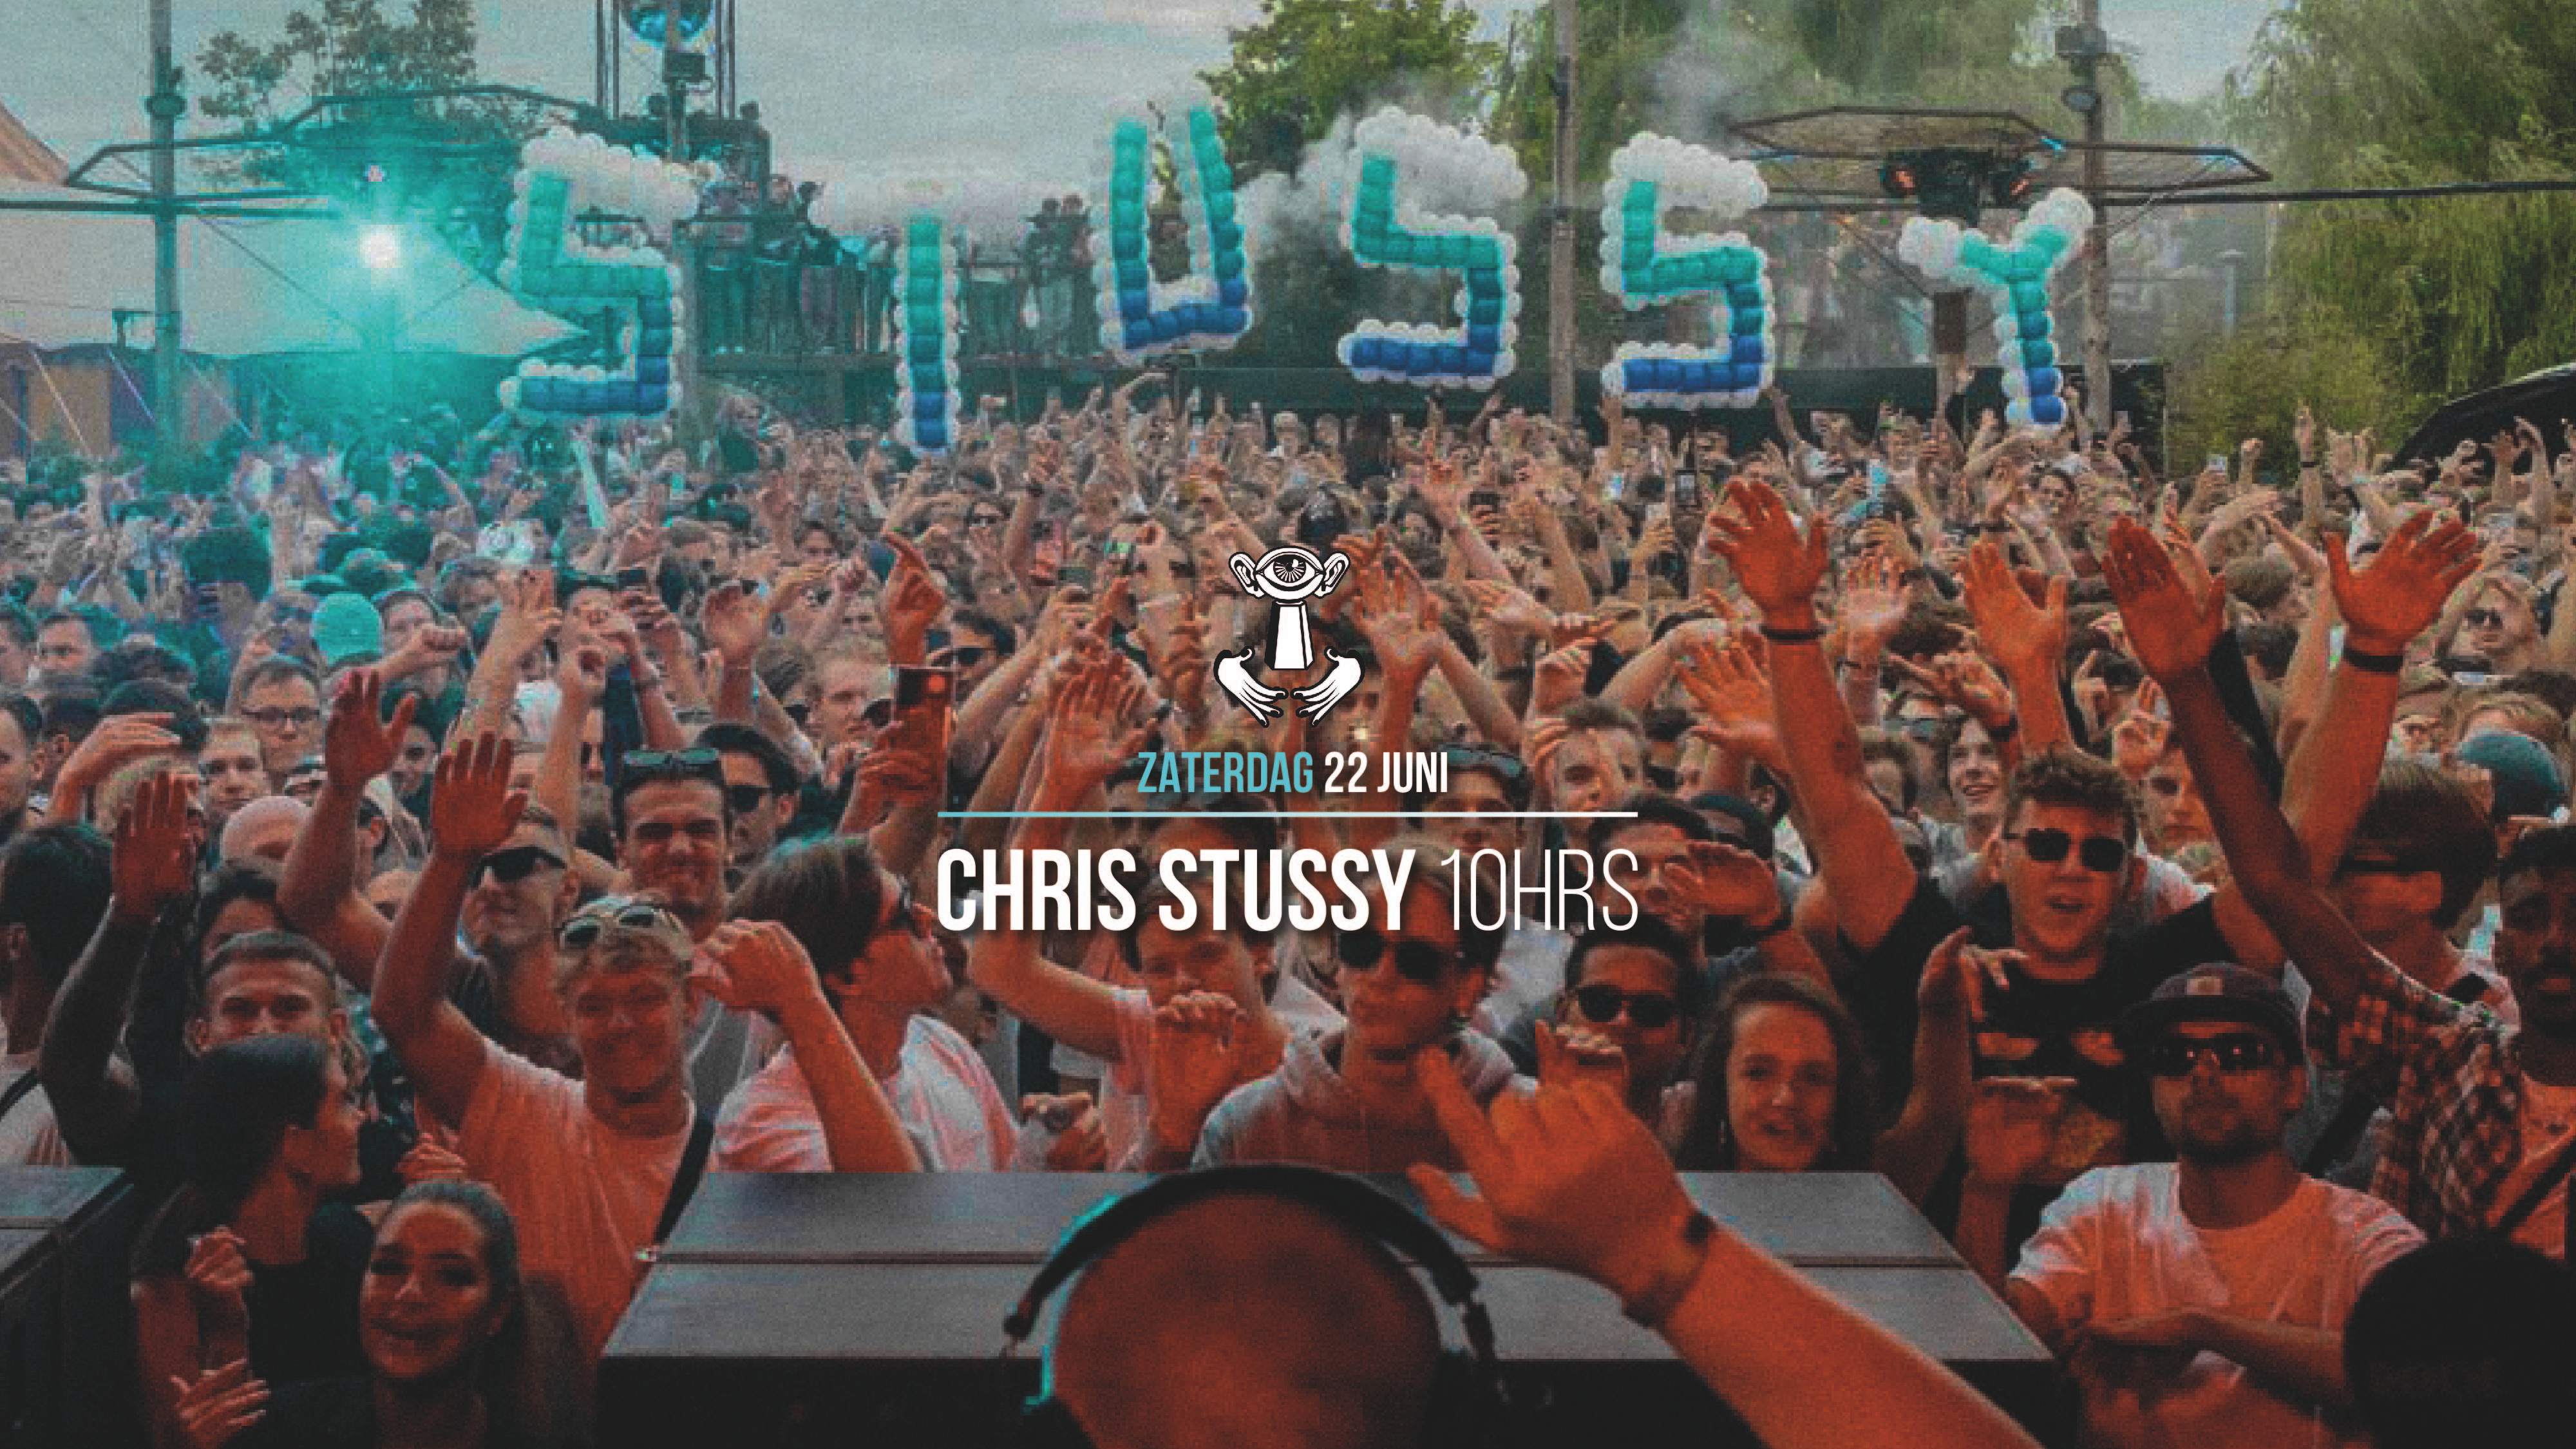 22 JUN - Thuishaven with Chris Stussy 10HRS | SOLD OUT - Página frontal